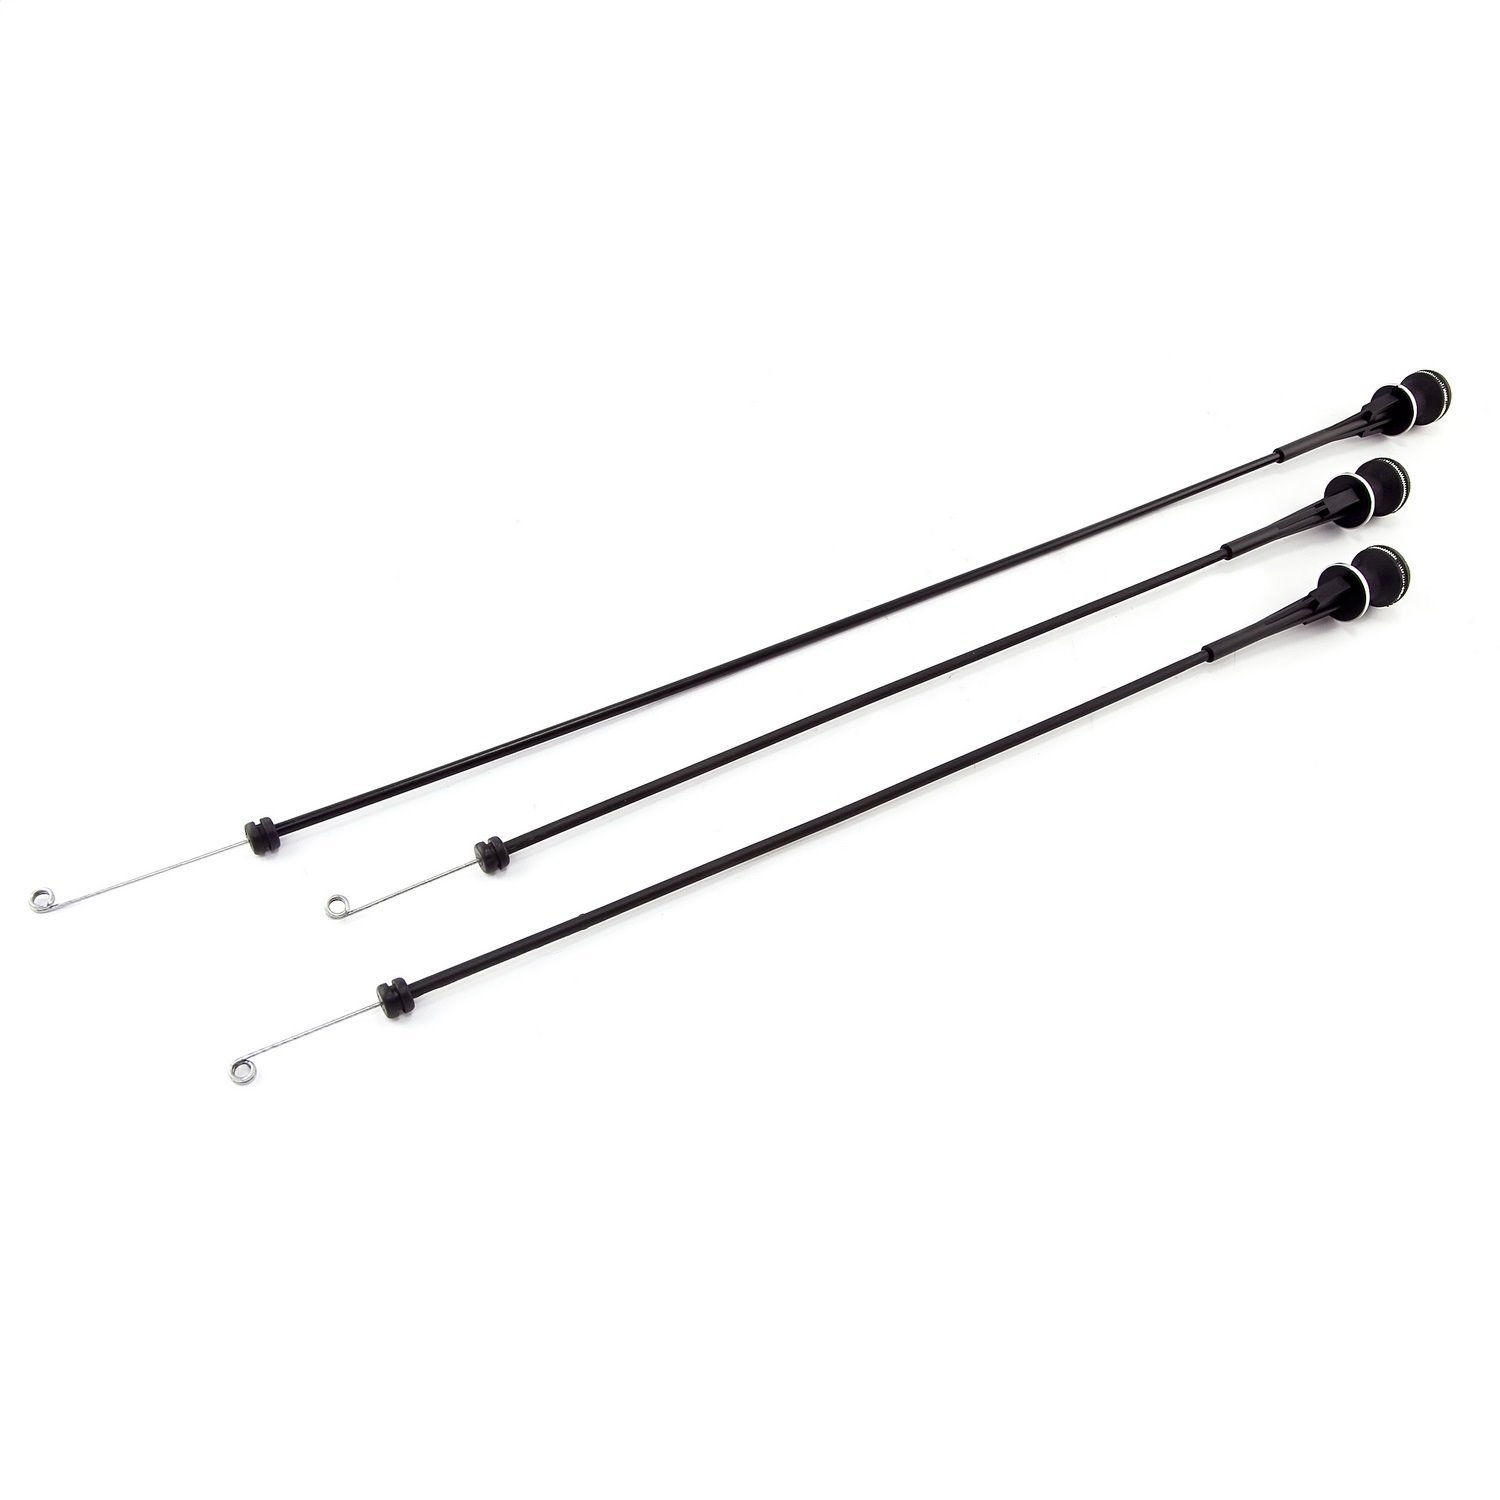 This 3 piece heater cable kit from Omix-ADA fits 78-86 Jeep CJ Models